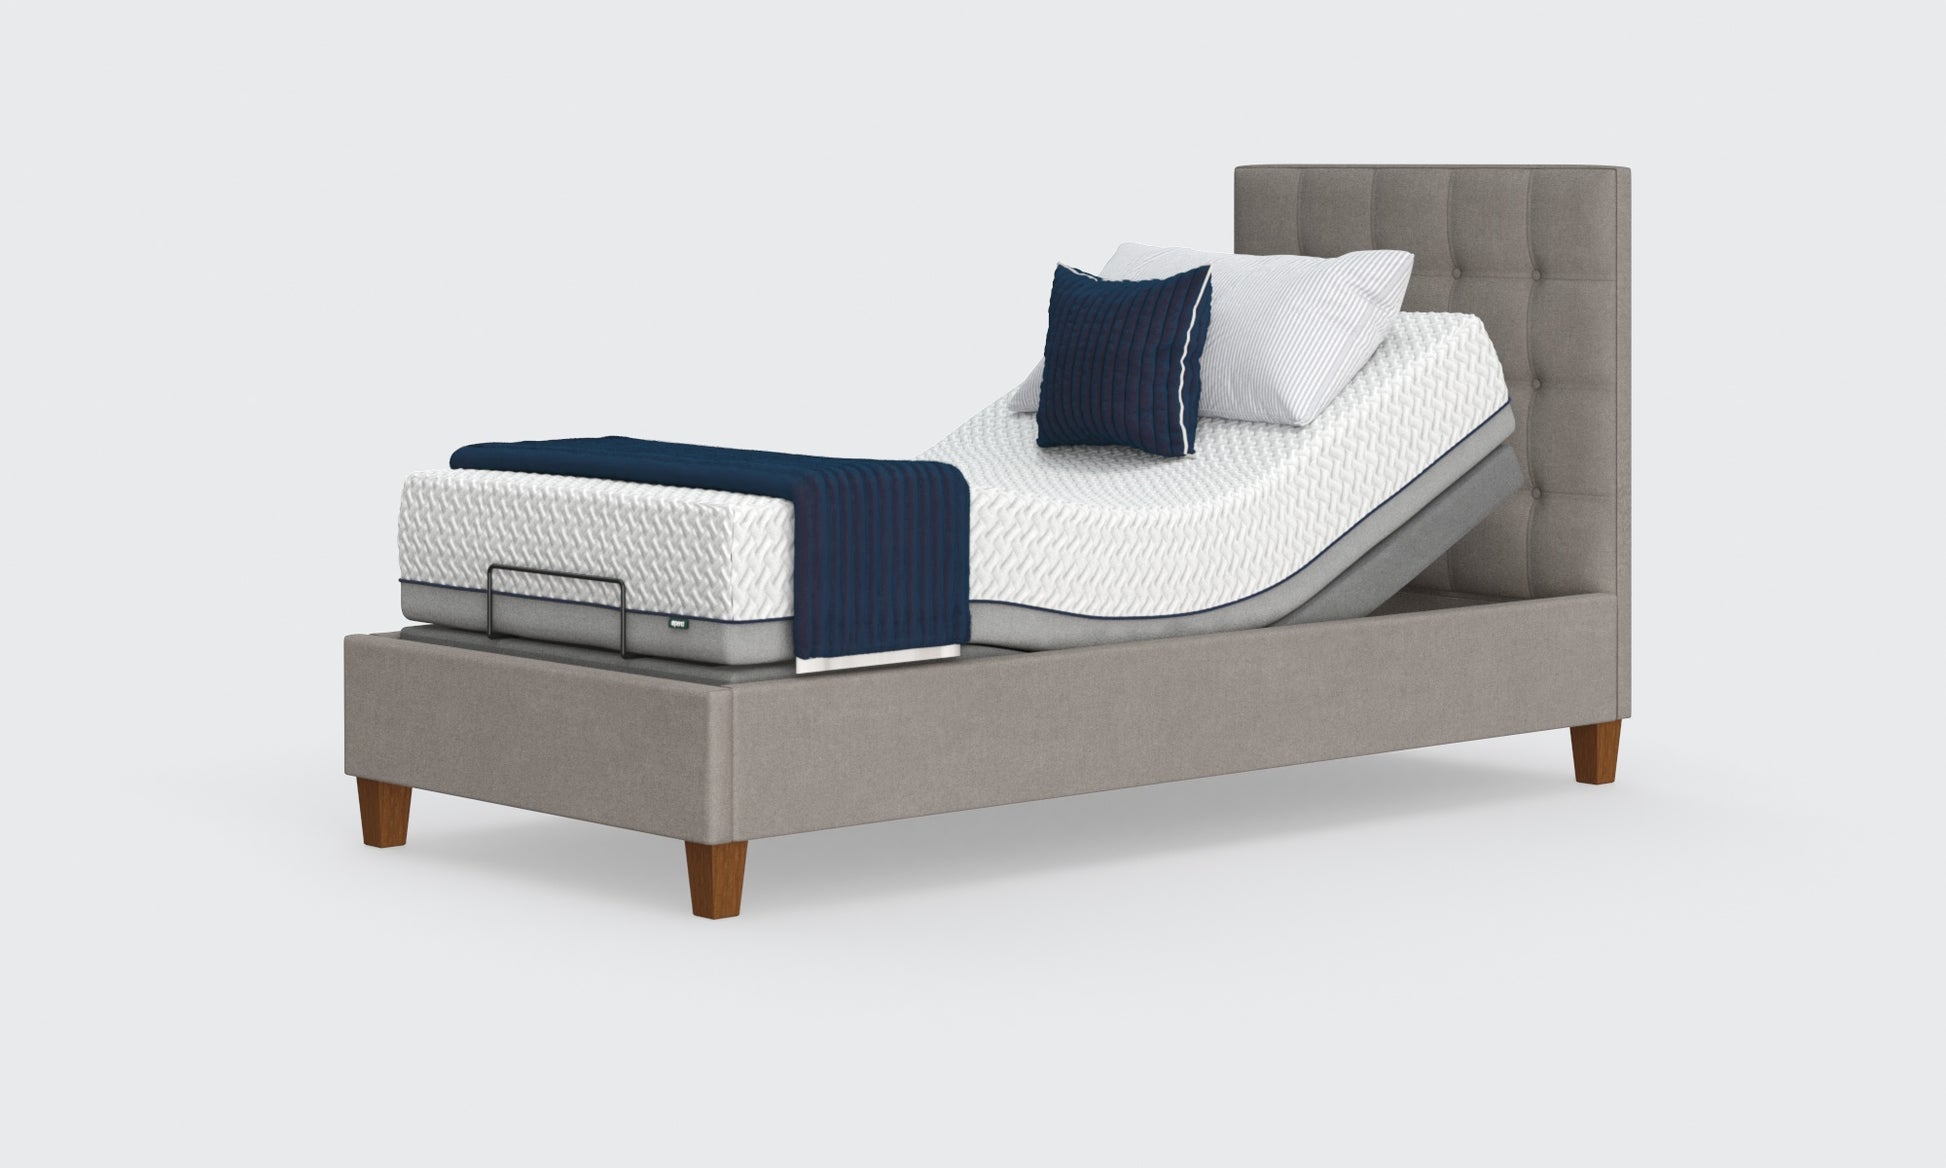 flyte shallow 3ft bed in the zinc material with an emerald headboard